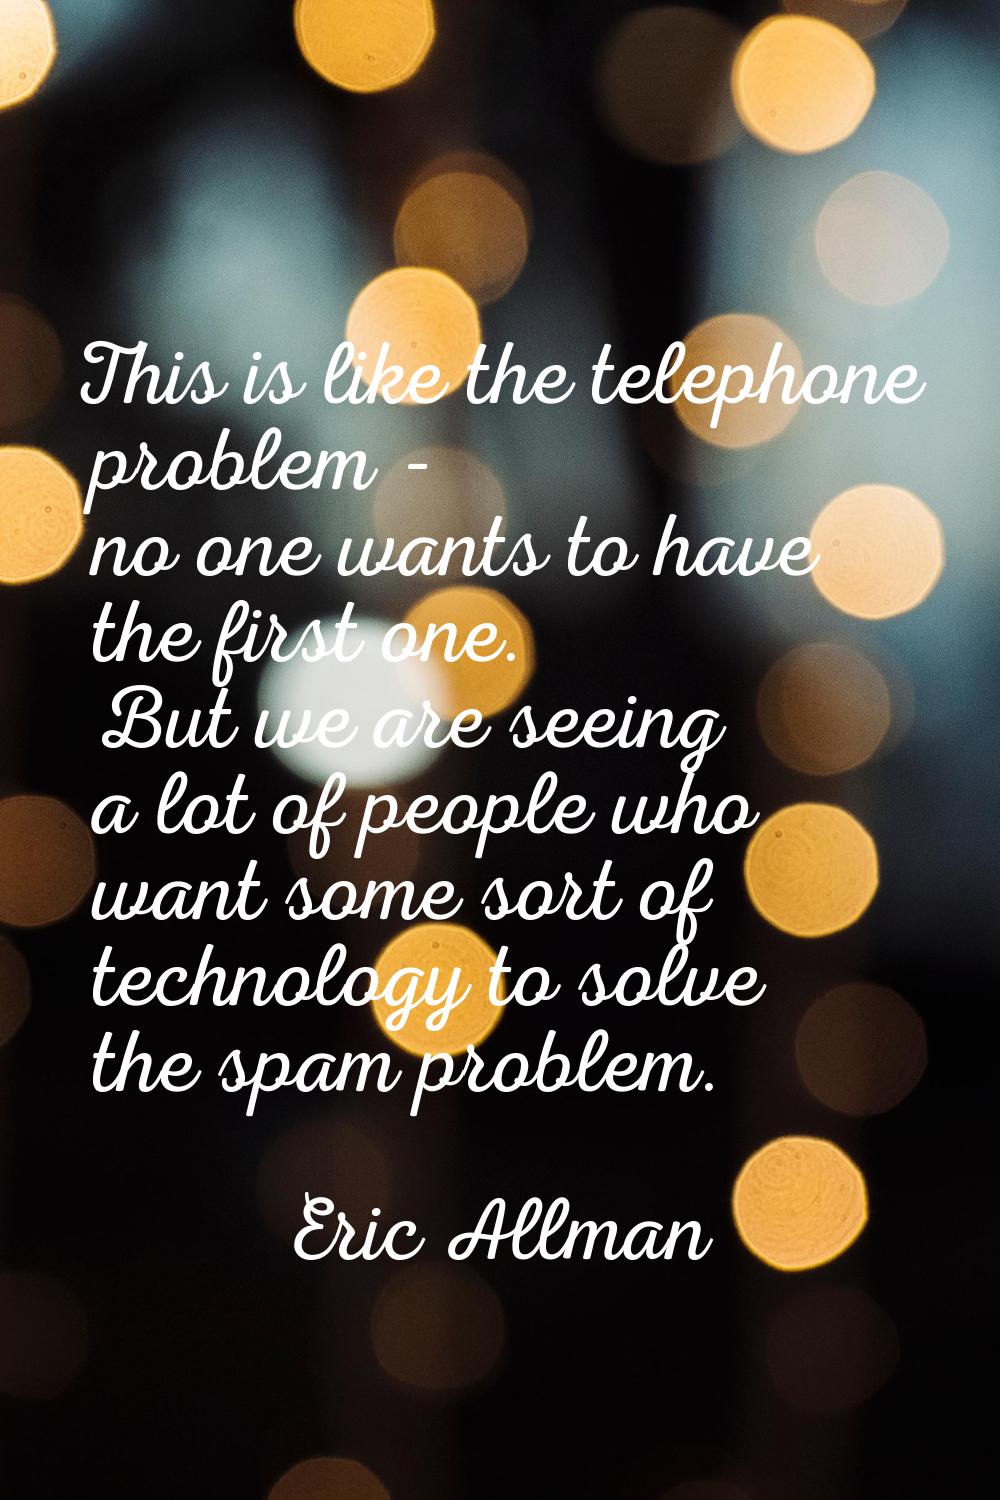 This is like the telephone problem - no one wants to have the first one. But we are seeing a lot of